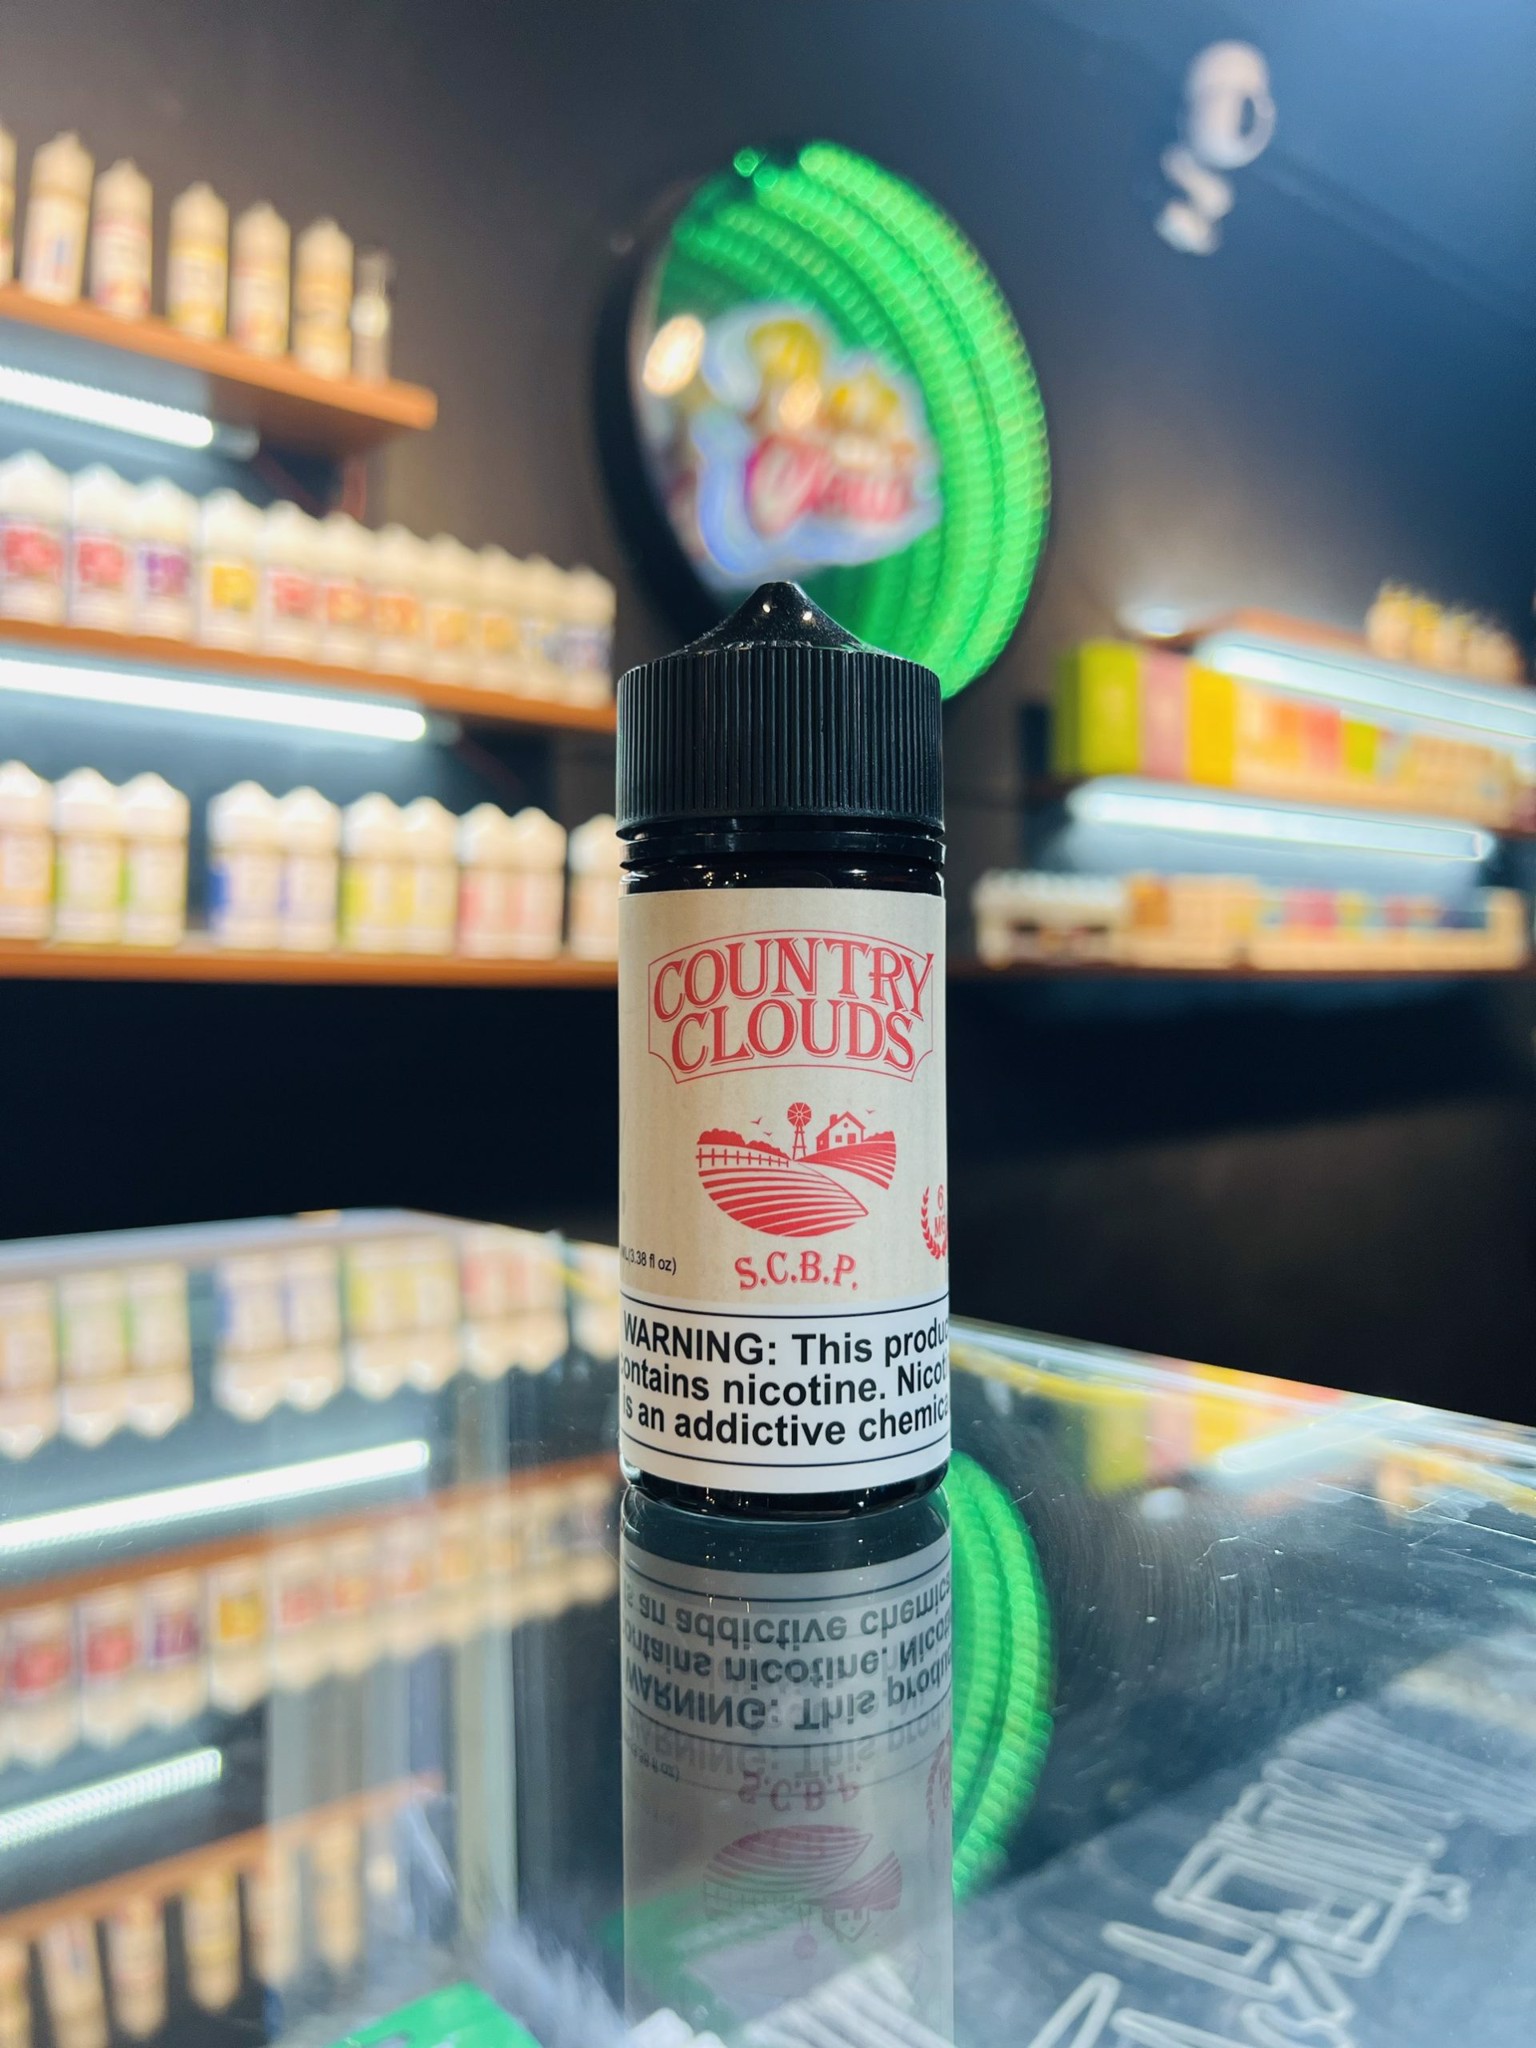 COUNTRY CLOUDS – S.C.B.P 100ML